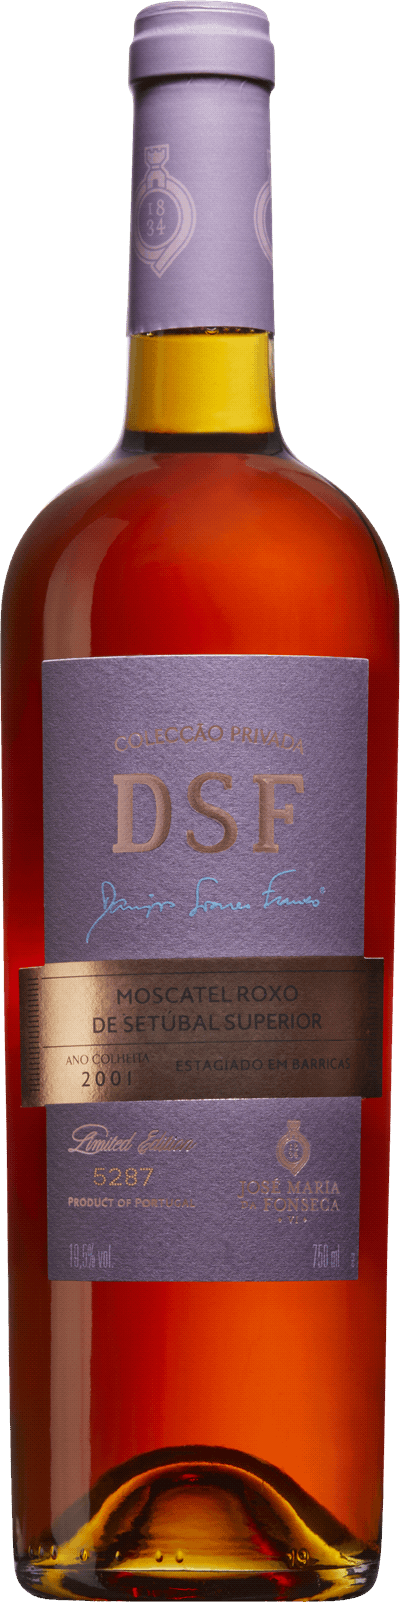 DSF Collection Moscatel Roxo de Setùbal Superior, 2001 | Systembolaget